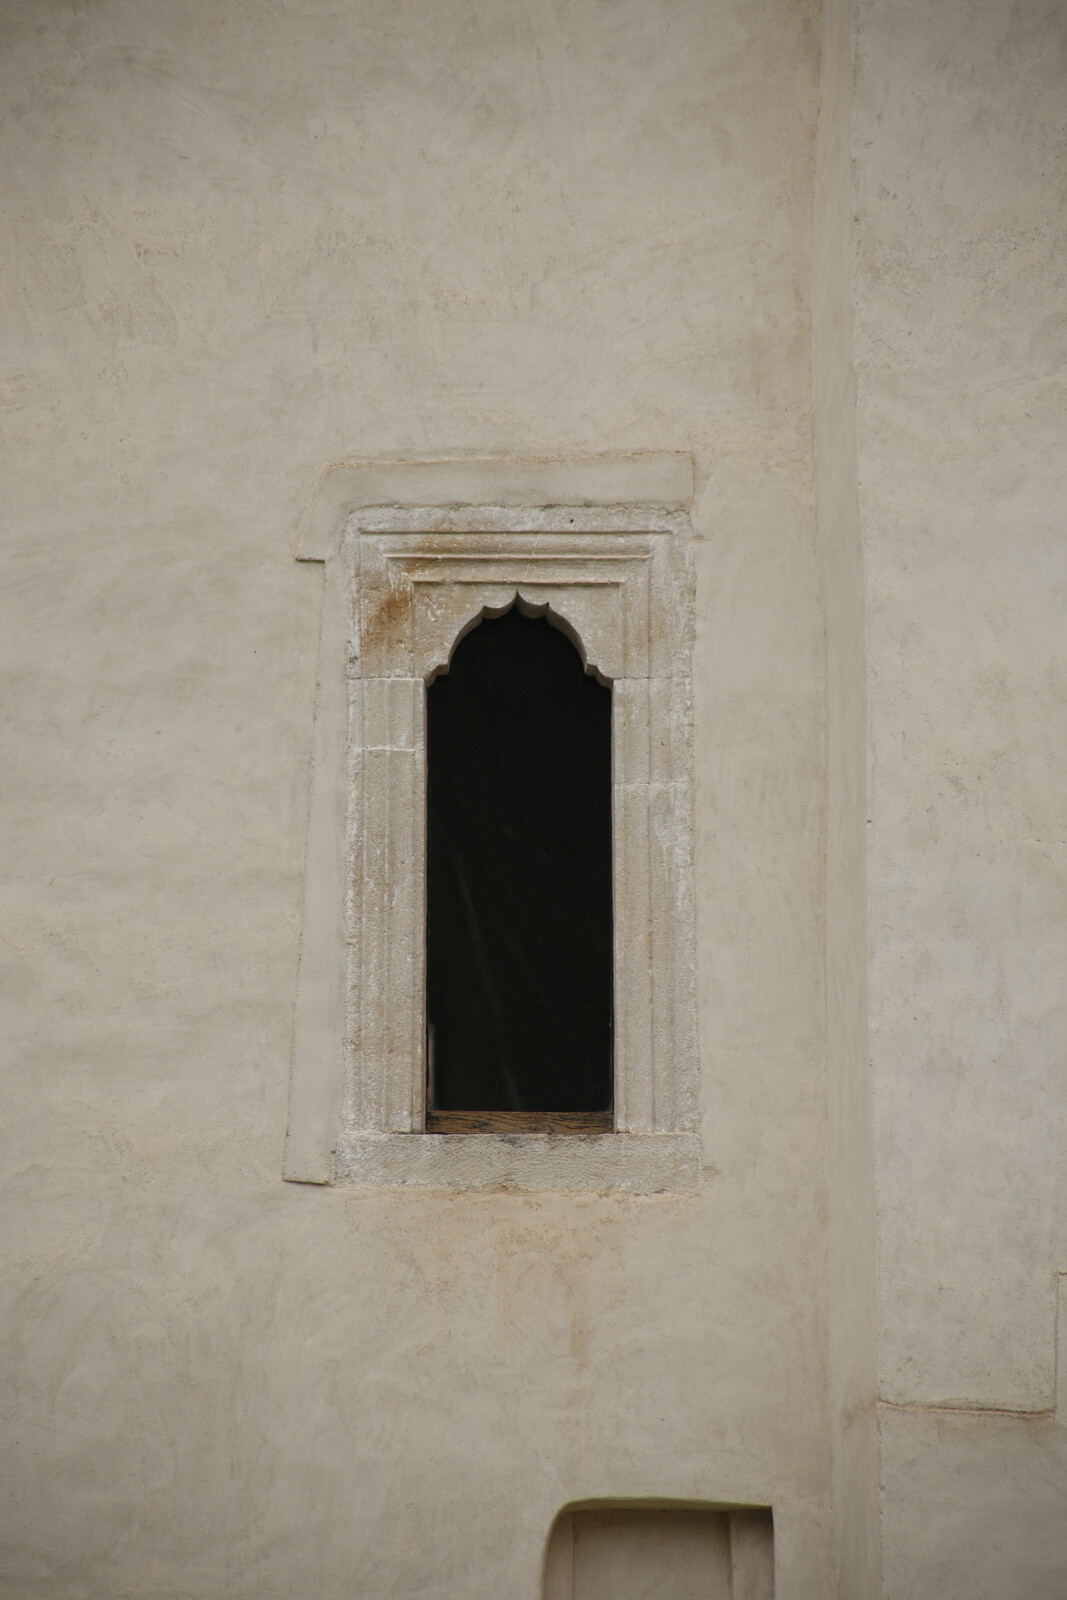 Window on the southern wall of the narthex